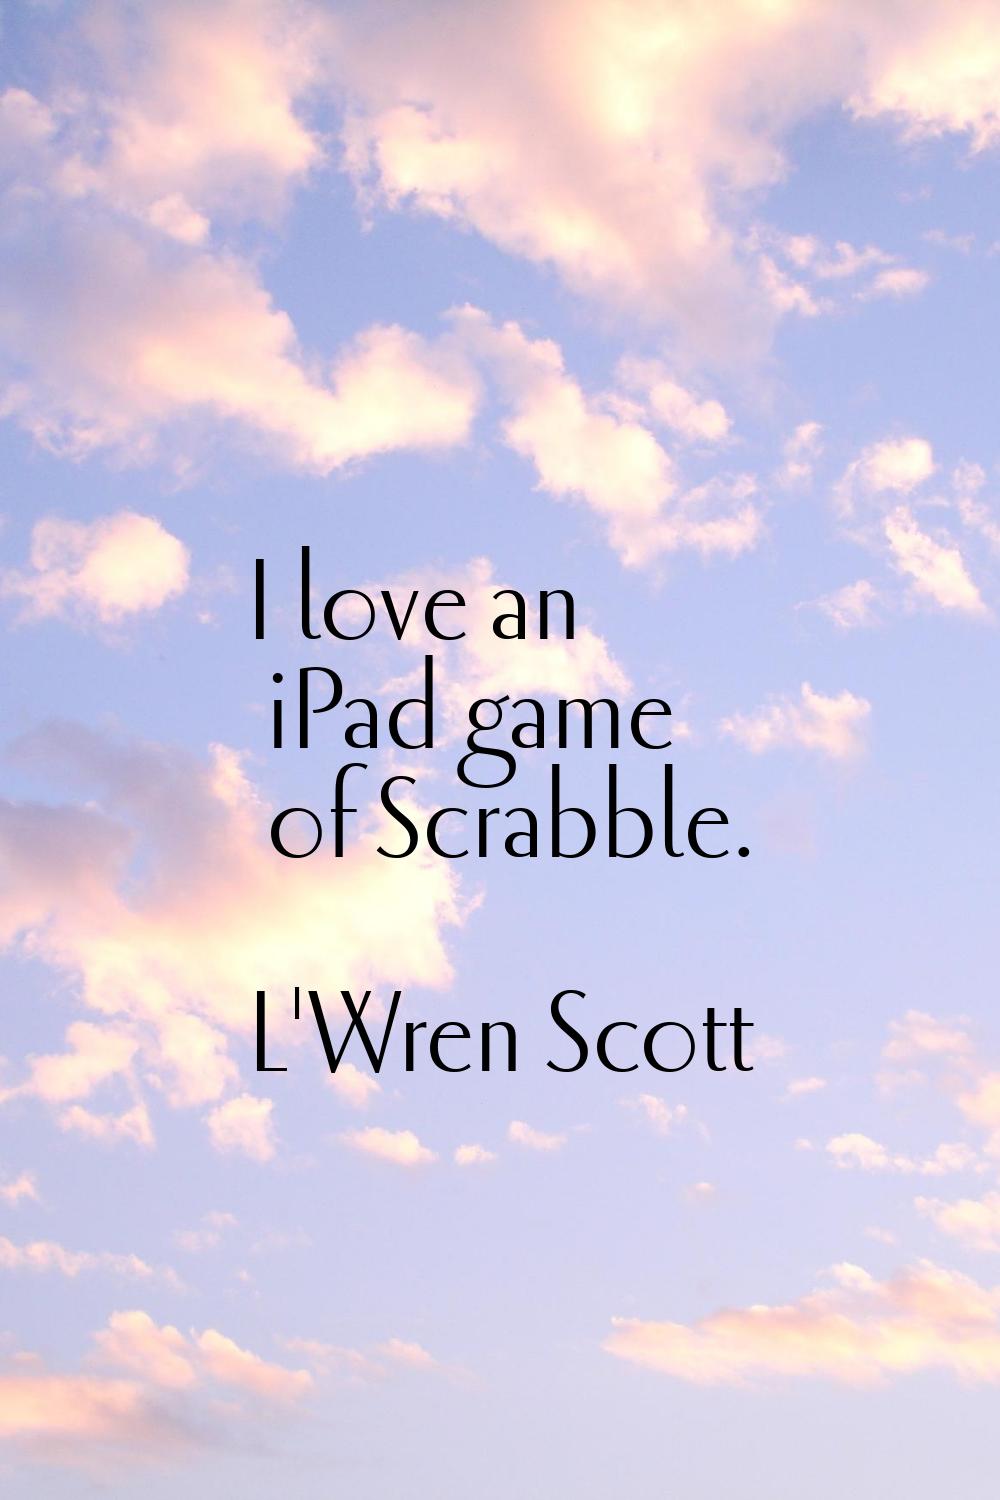 I love an iPad game of Scrabble.